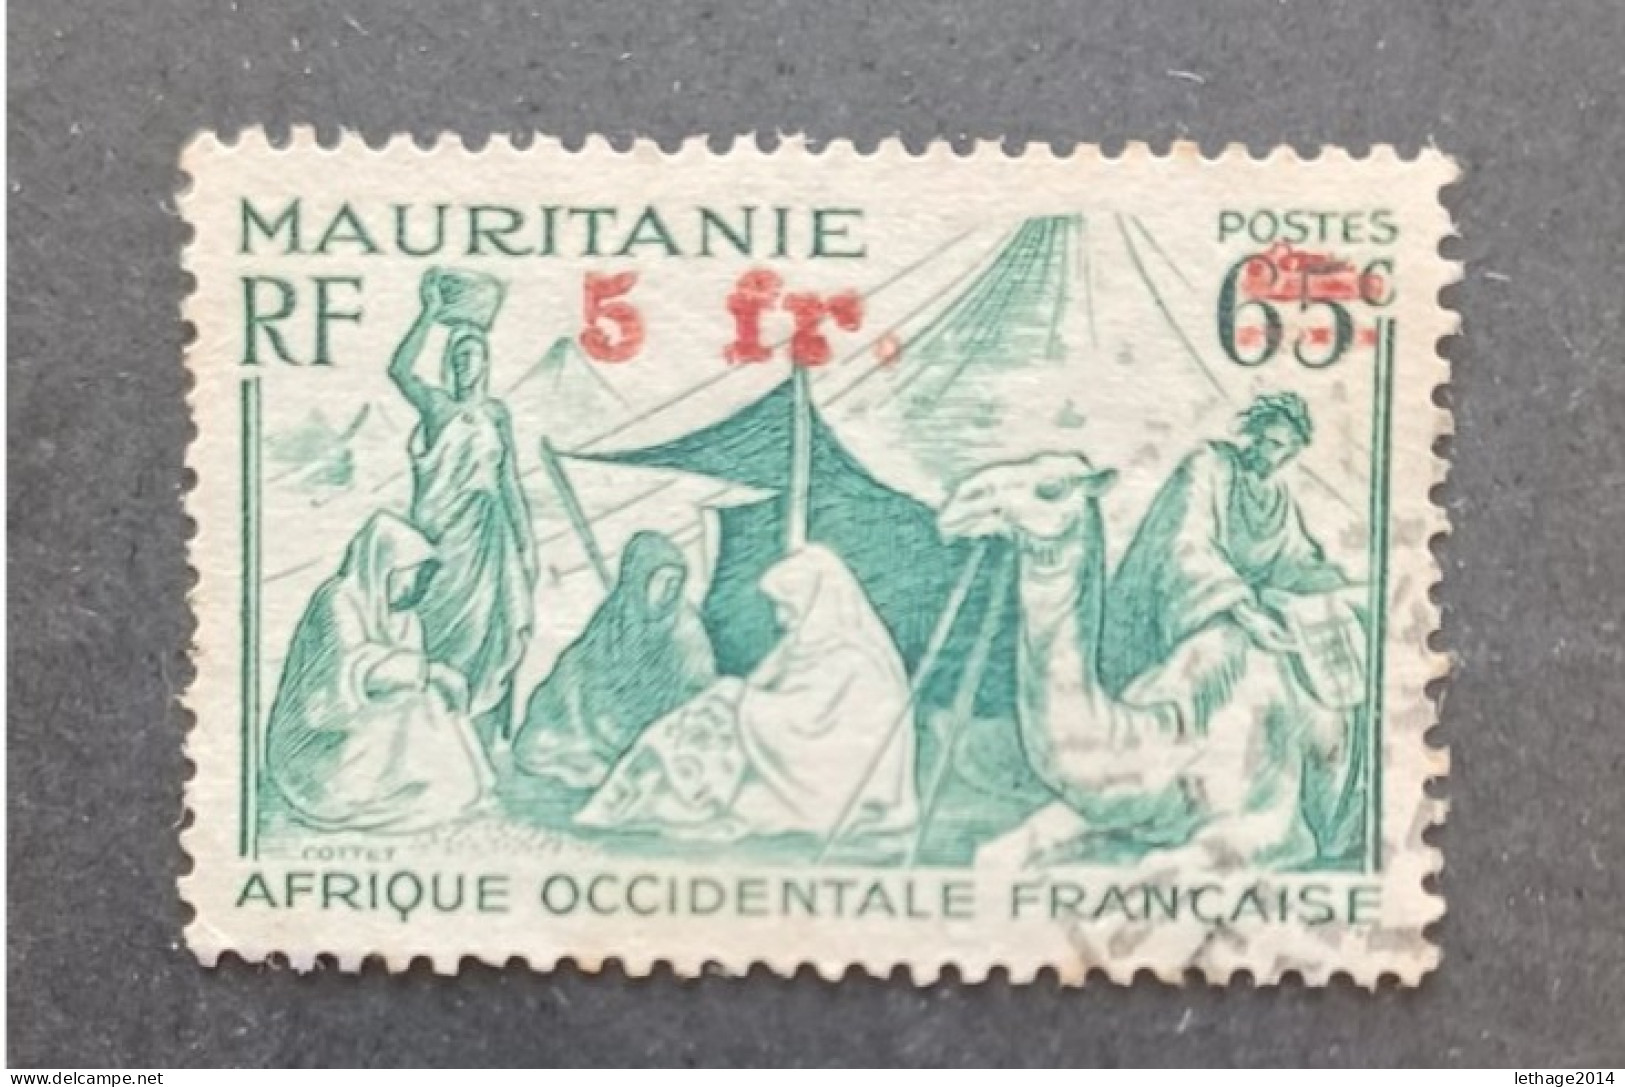 COLONIE FRANCE MAURITANIE 1944 NOMADES CAT YVERT N 135 VARIETY OVERPRINT TRIPLE STRETCH TO THE RIGHT - Oblitérés